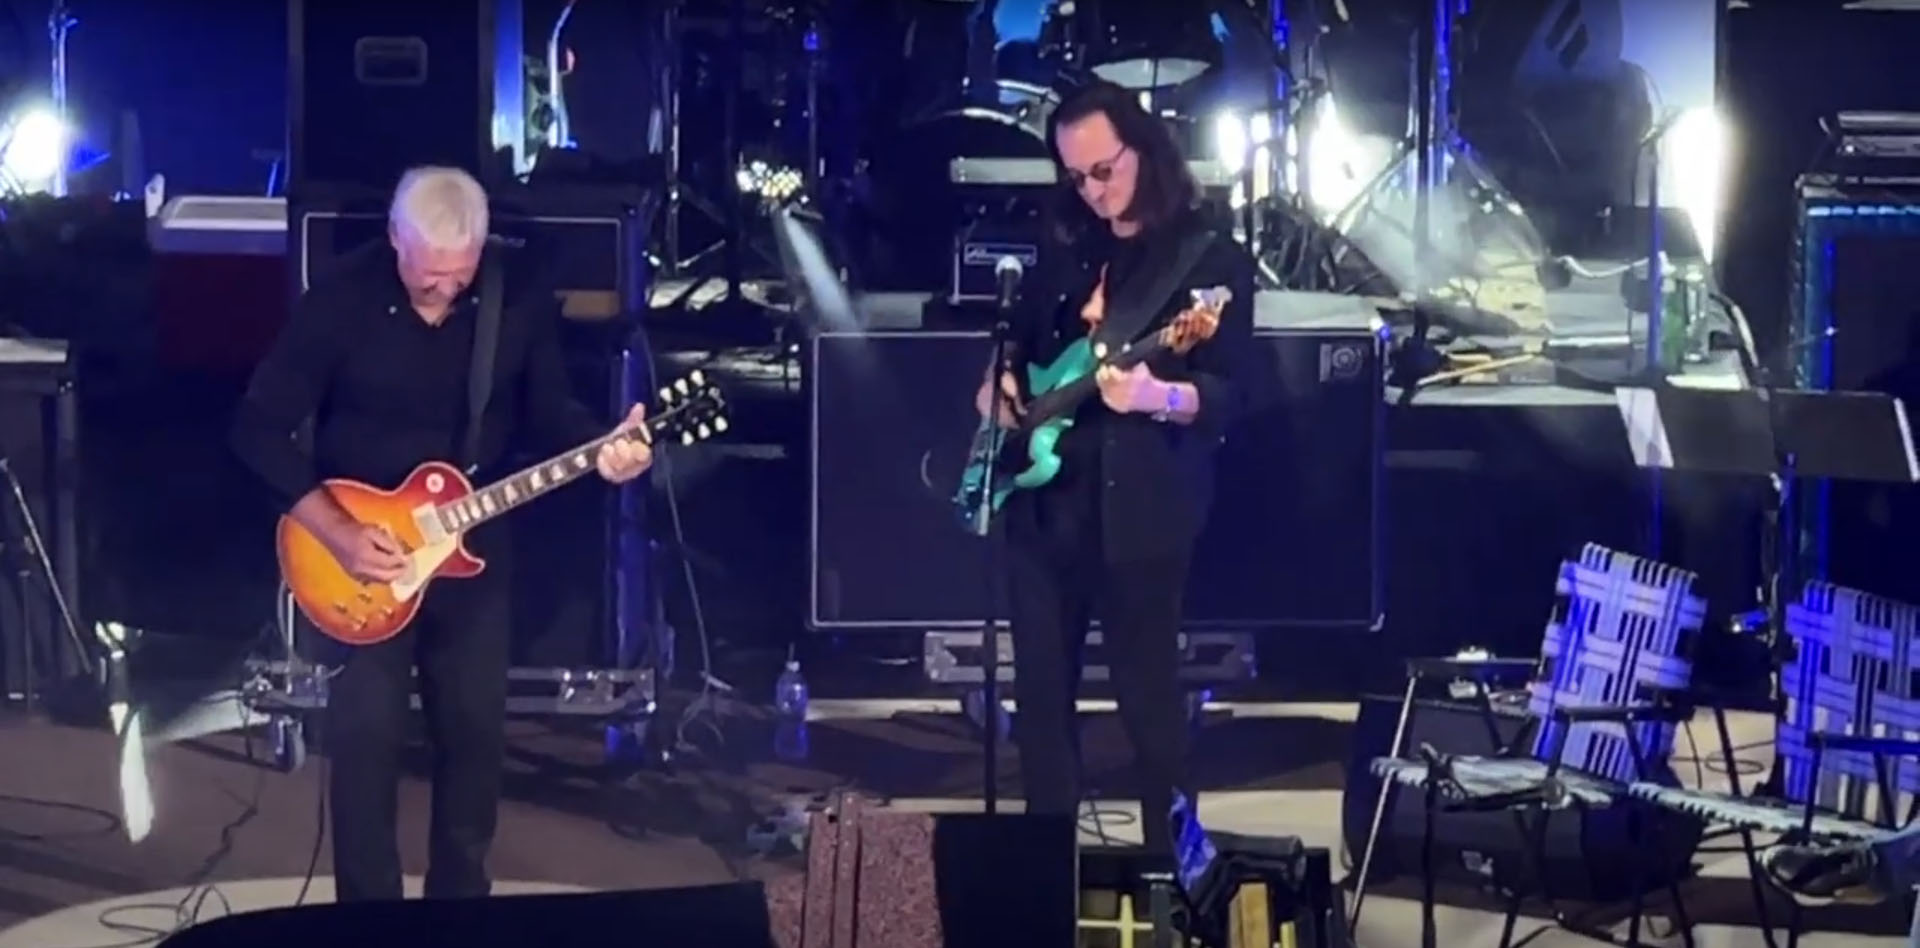 Geddy Lee and Alex Lifeson perform at the South Park Anniversary Concert Event